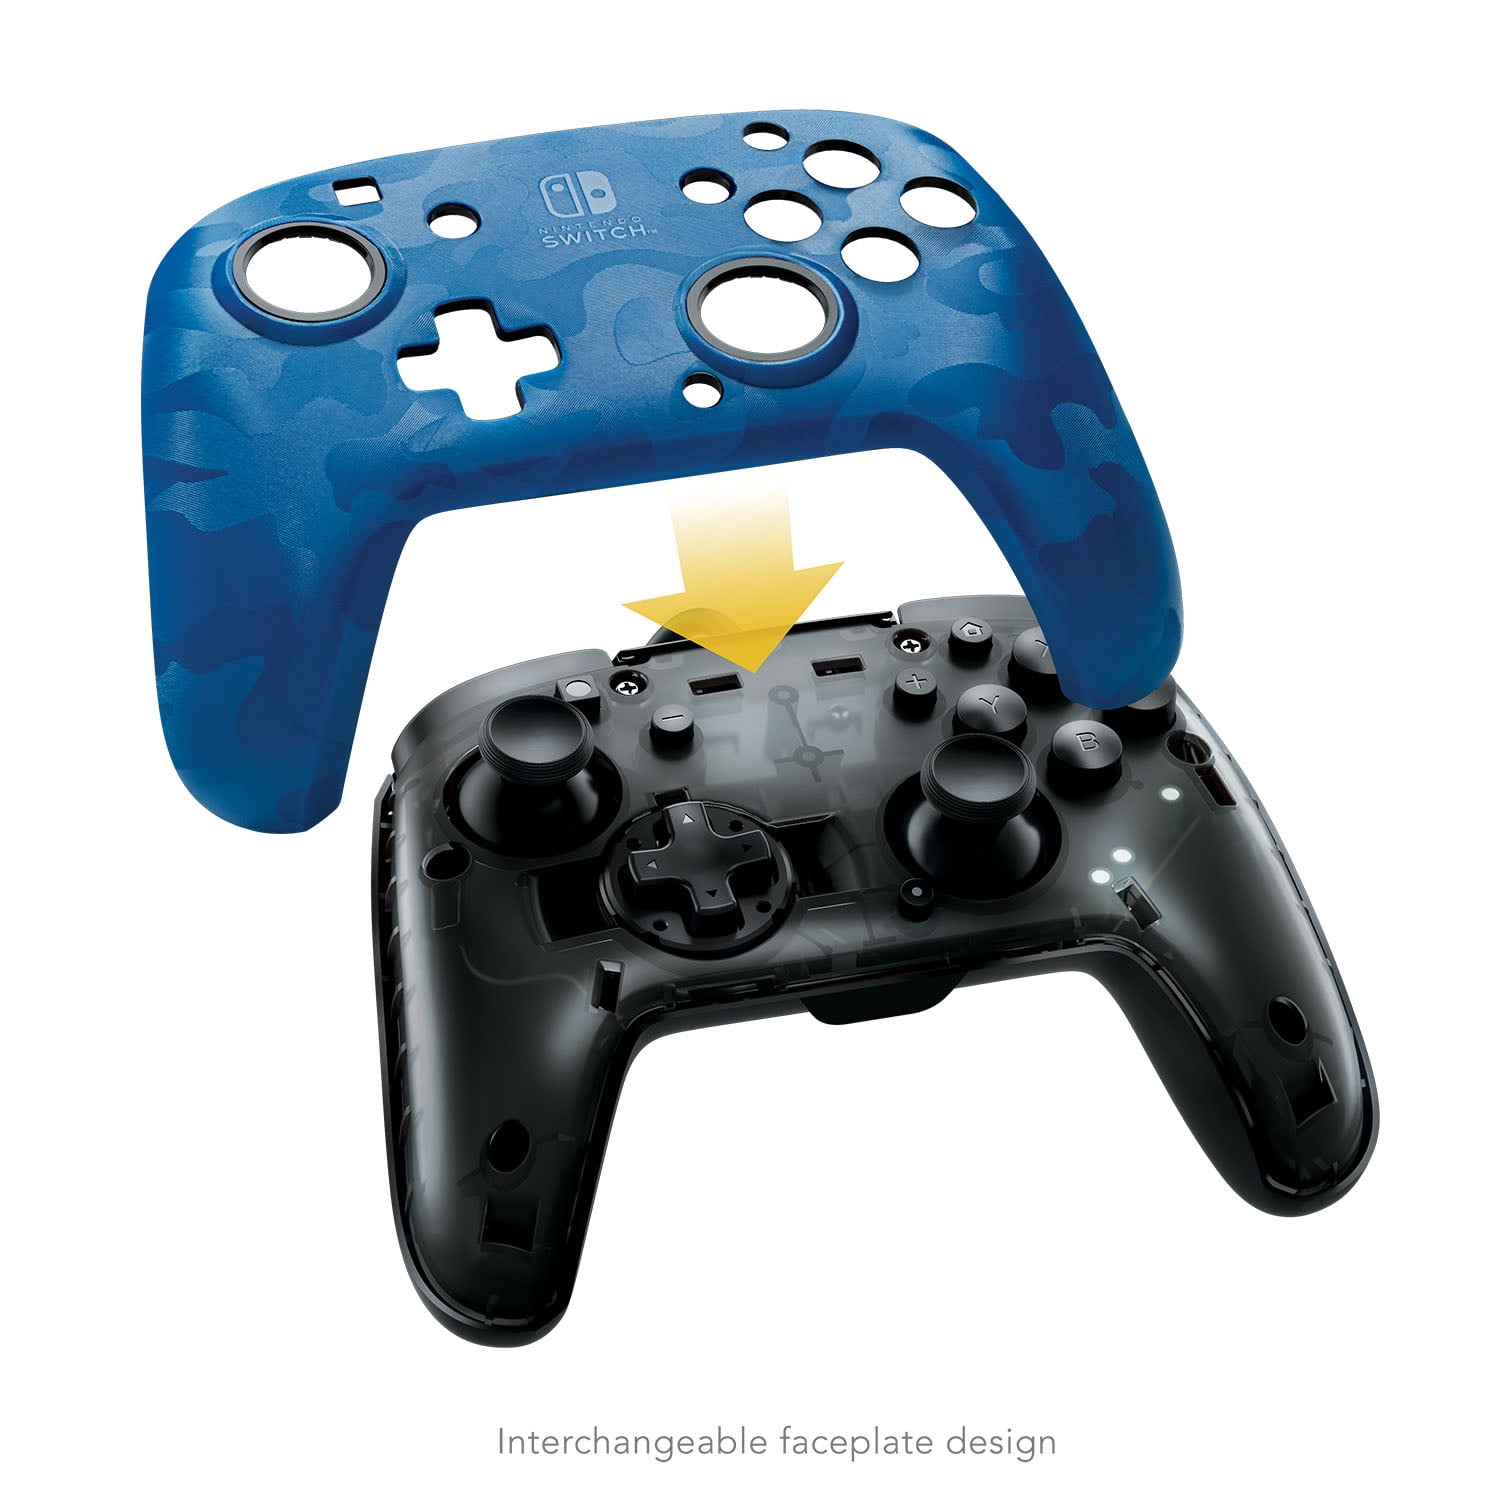 Nintendo Switch Faceoff Camo Wired Pro Controller by PDP, Blue, 500-119